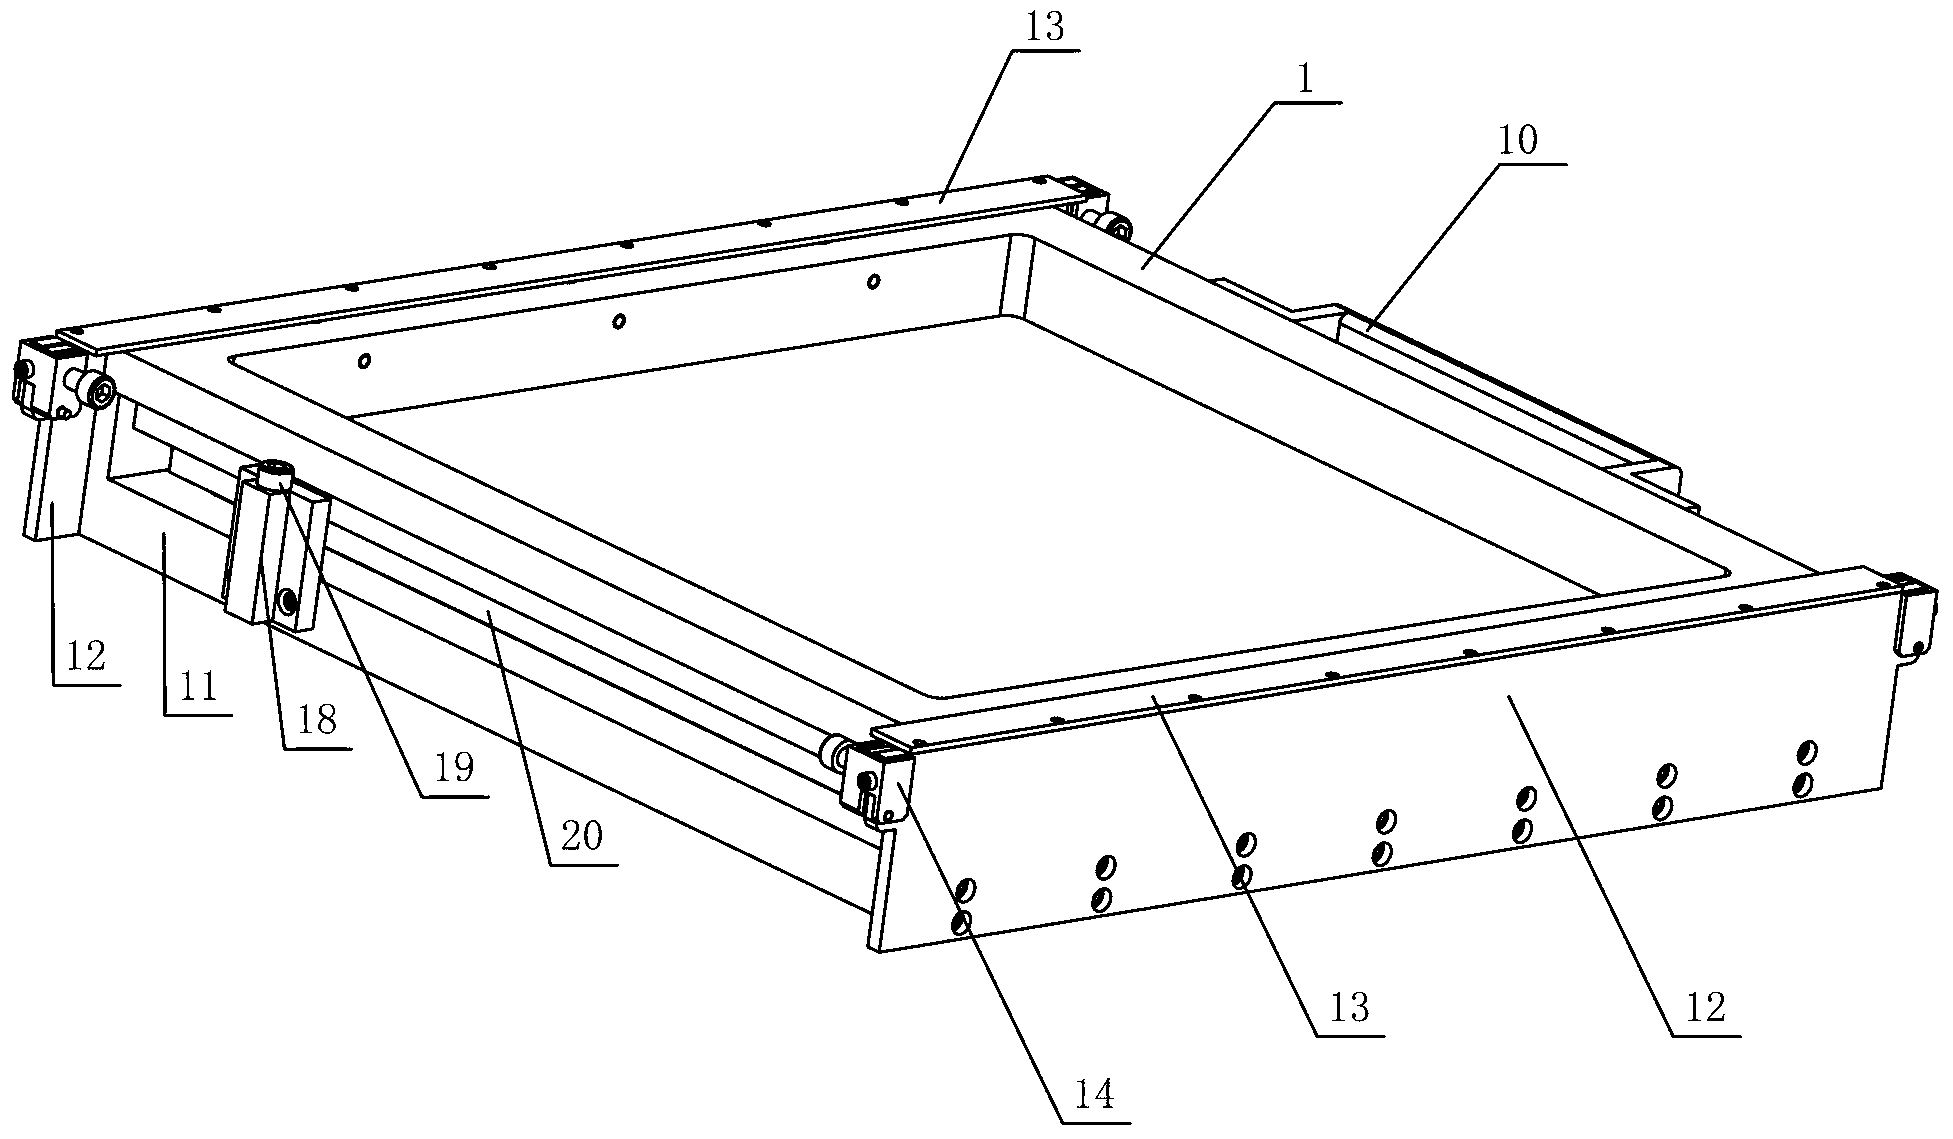 Fast assembly and disassembly mechanism for nonlinear large-aperture optical elements